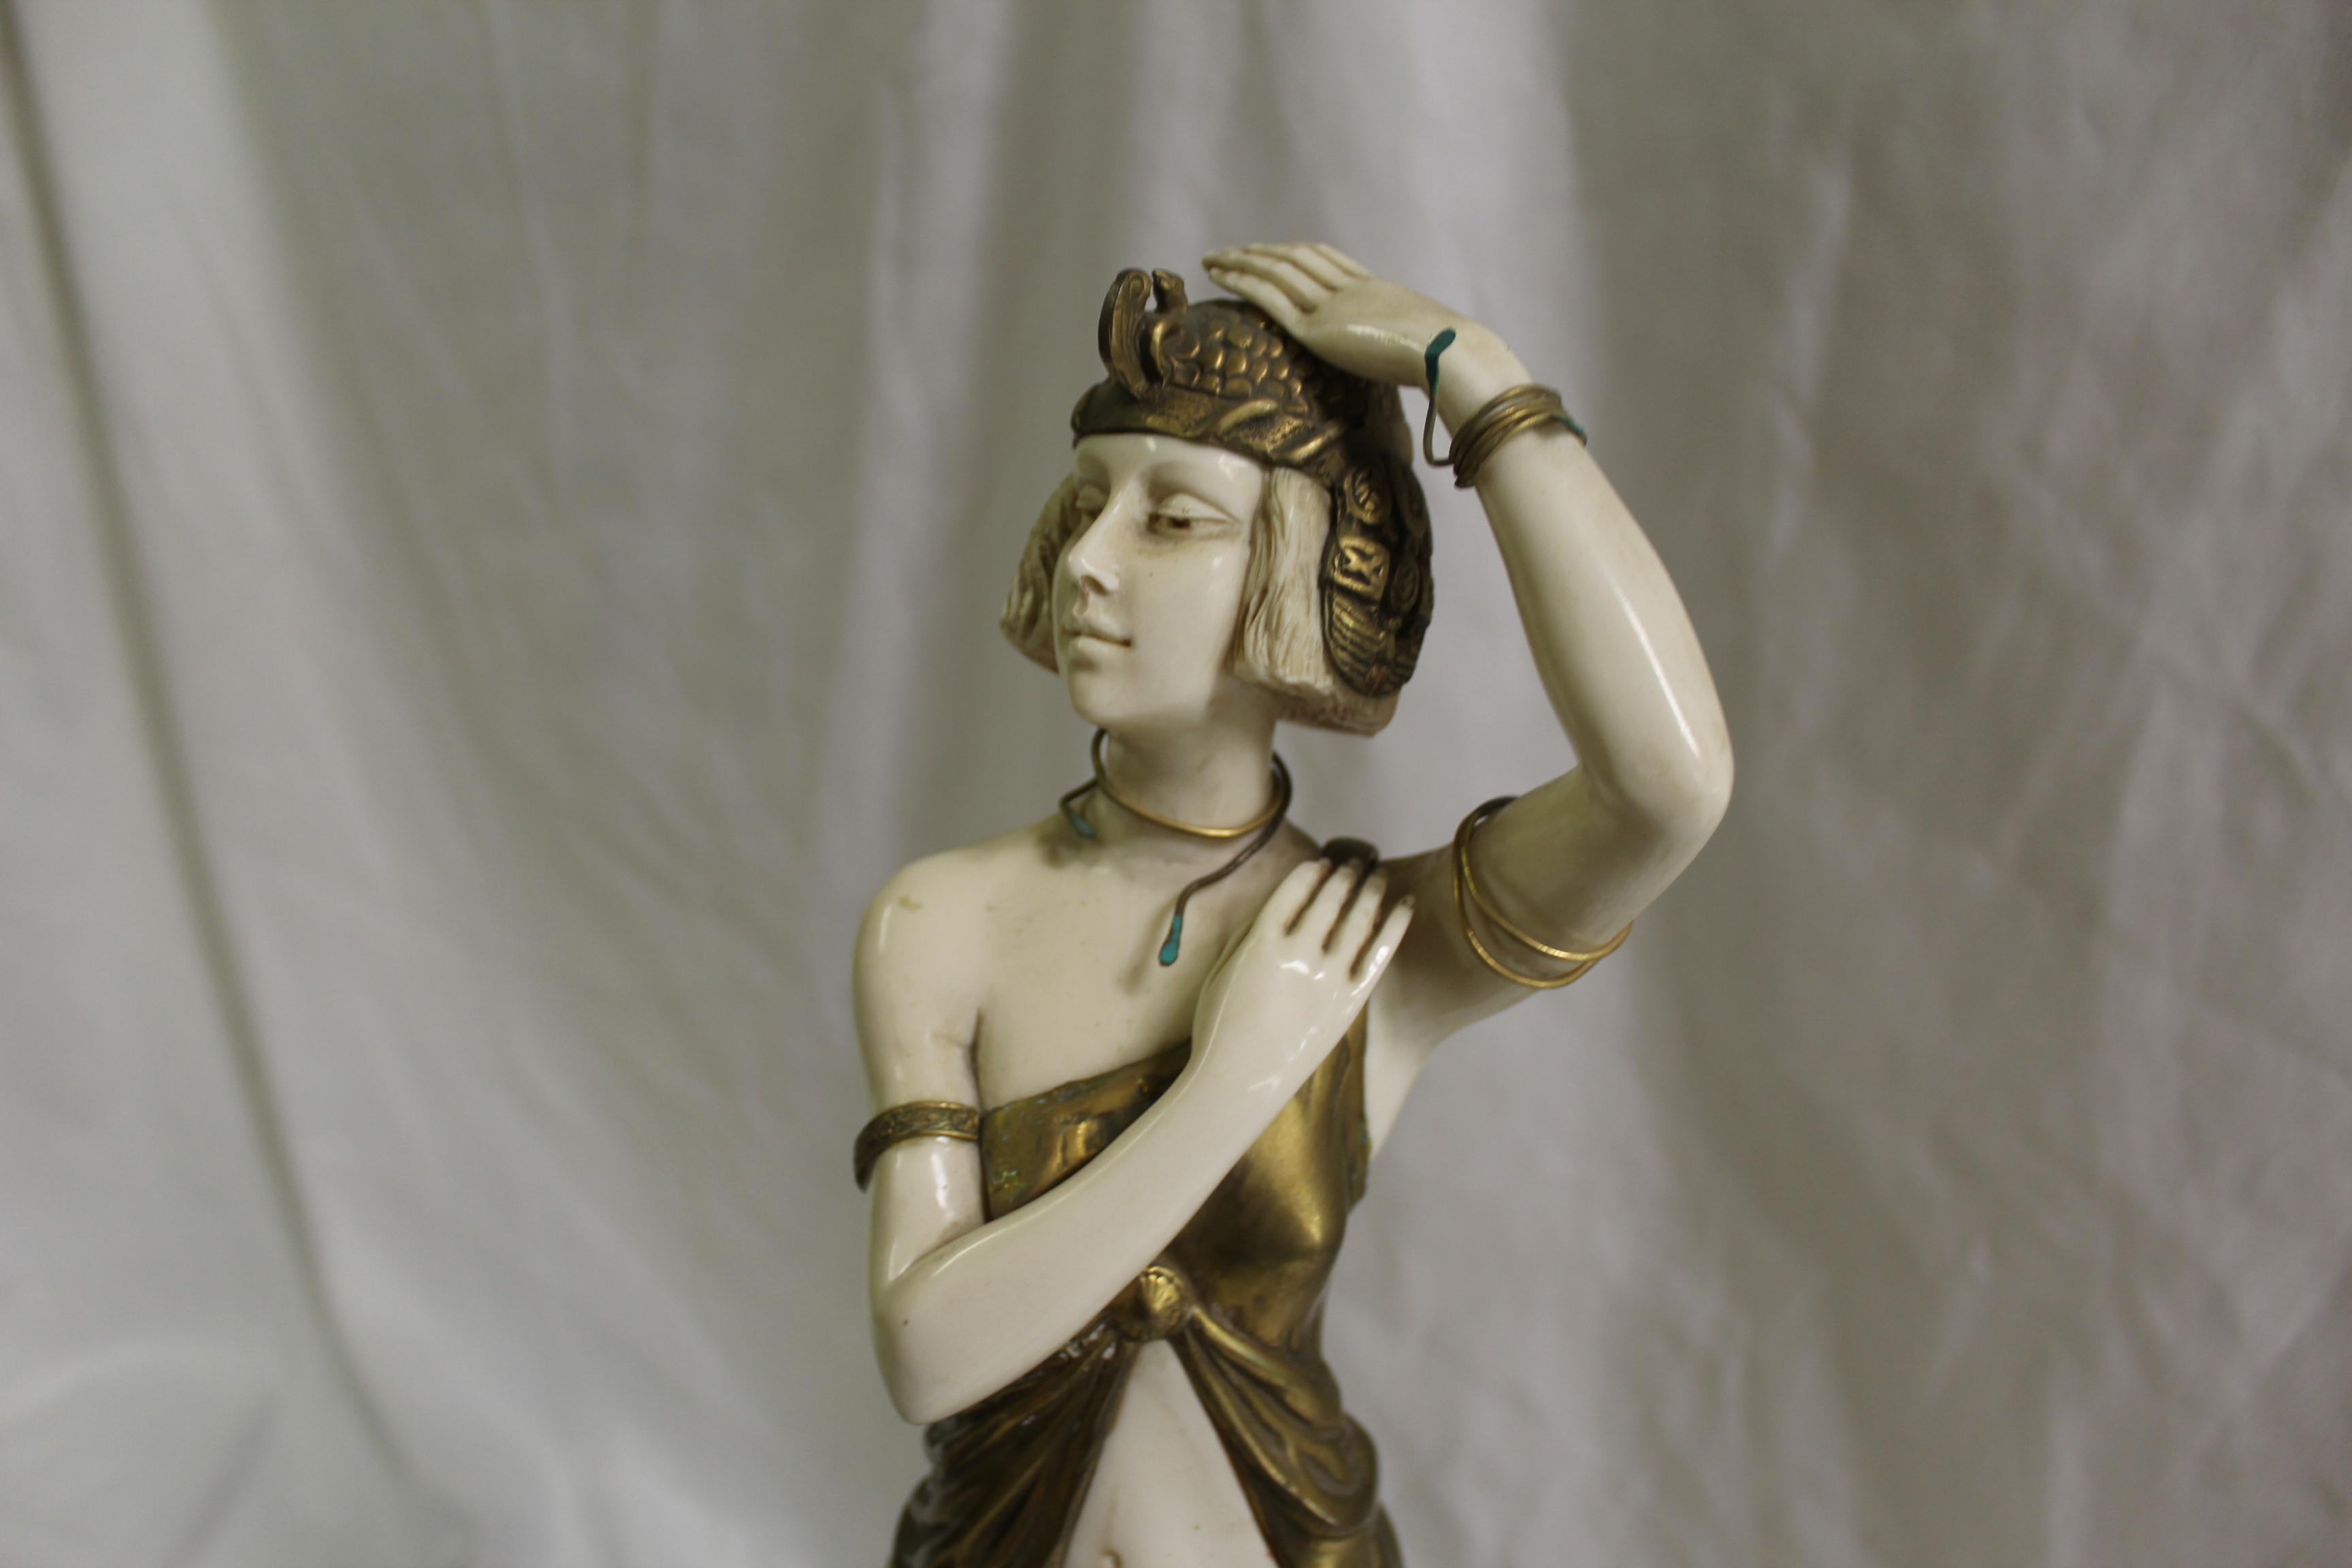 A very popular Deco sculpture of an Elegant lady in full dress walking down the Grand Steps. Cast in bronze with polished patina finish and cold painted peacock dress. Mounted on a solid set of Marble steps with design side panels. Large size and